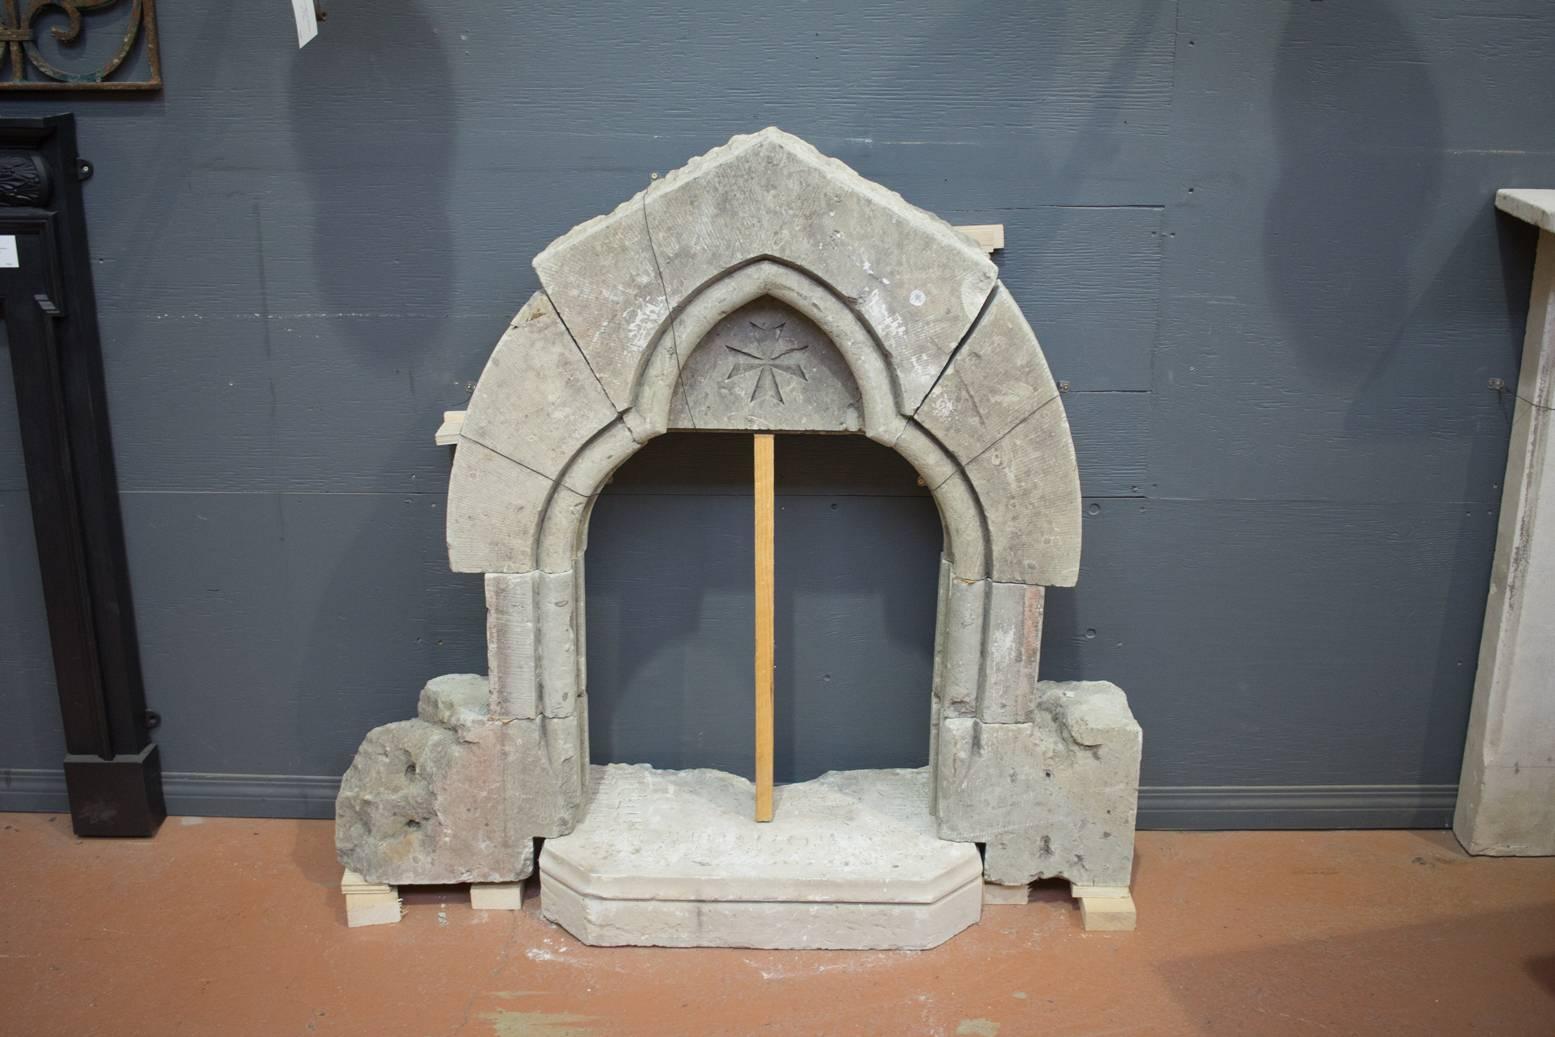 Antique English Gothic stone window with a carved cross in the arch. Could be made into a wonderful fountain or garden feature.

Possibly 18th century.